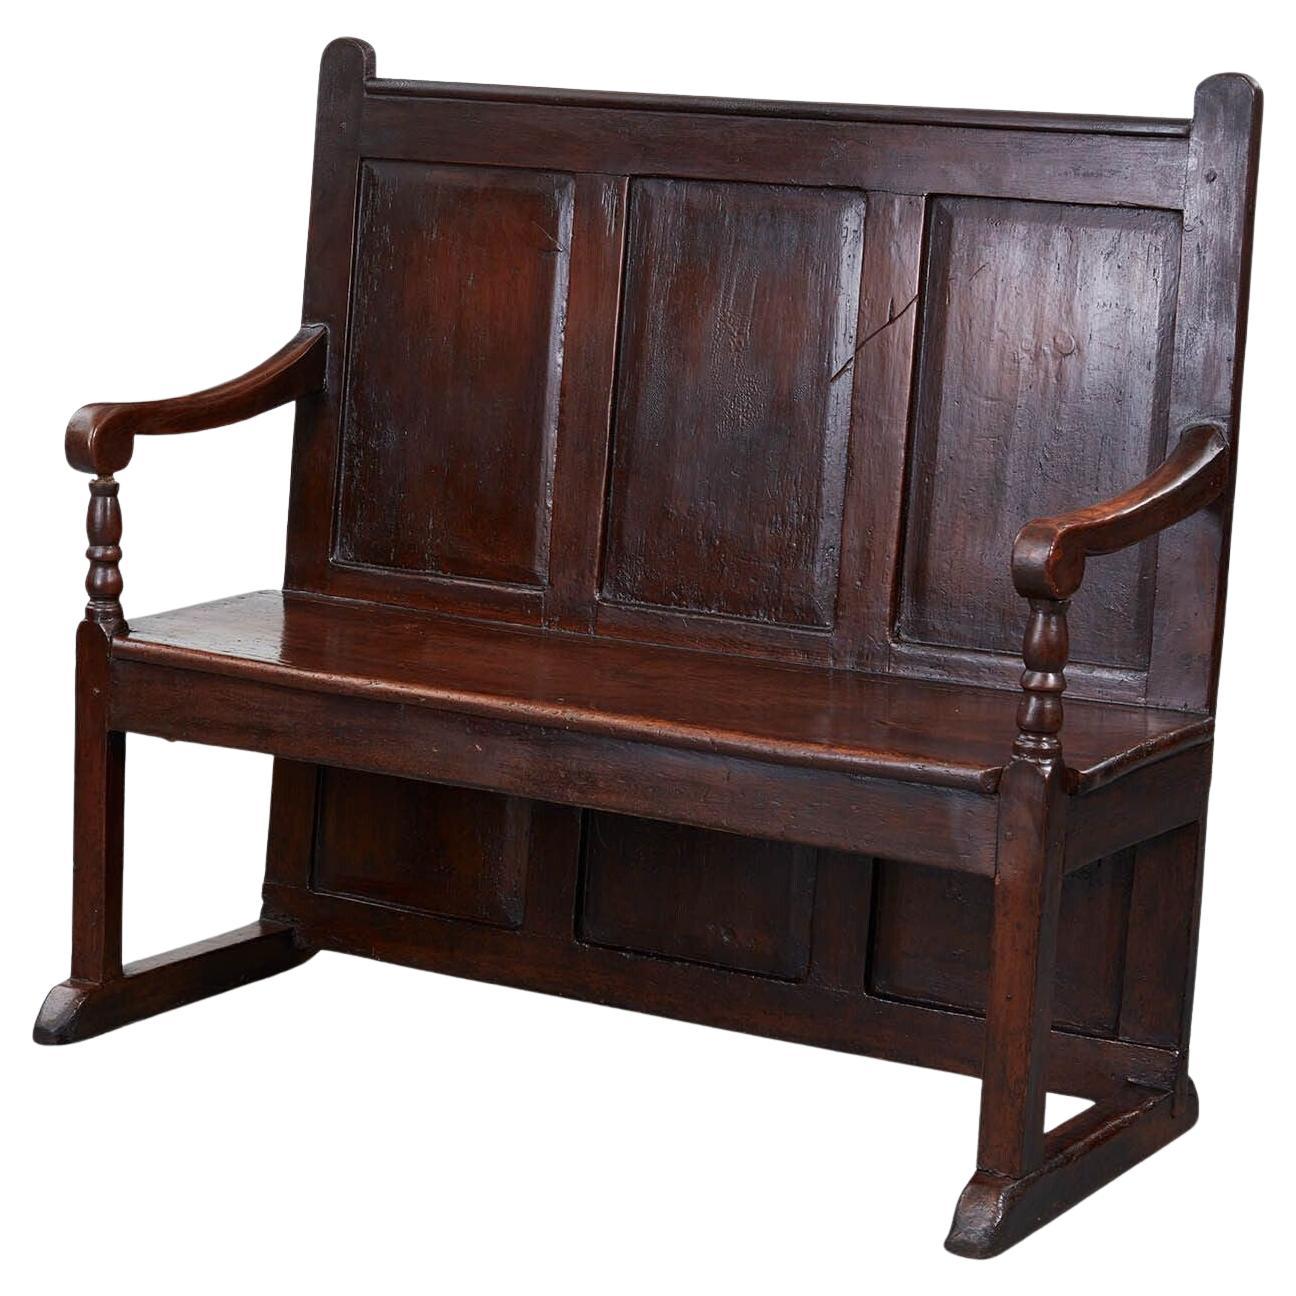 Paneled Settle Bench with Sled Feet